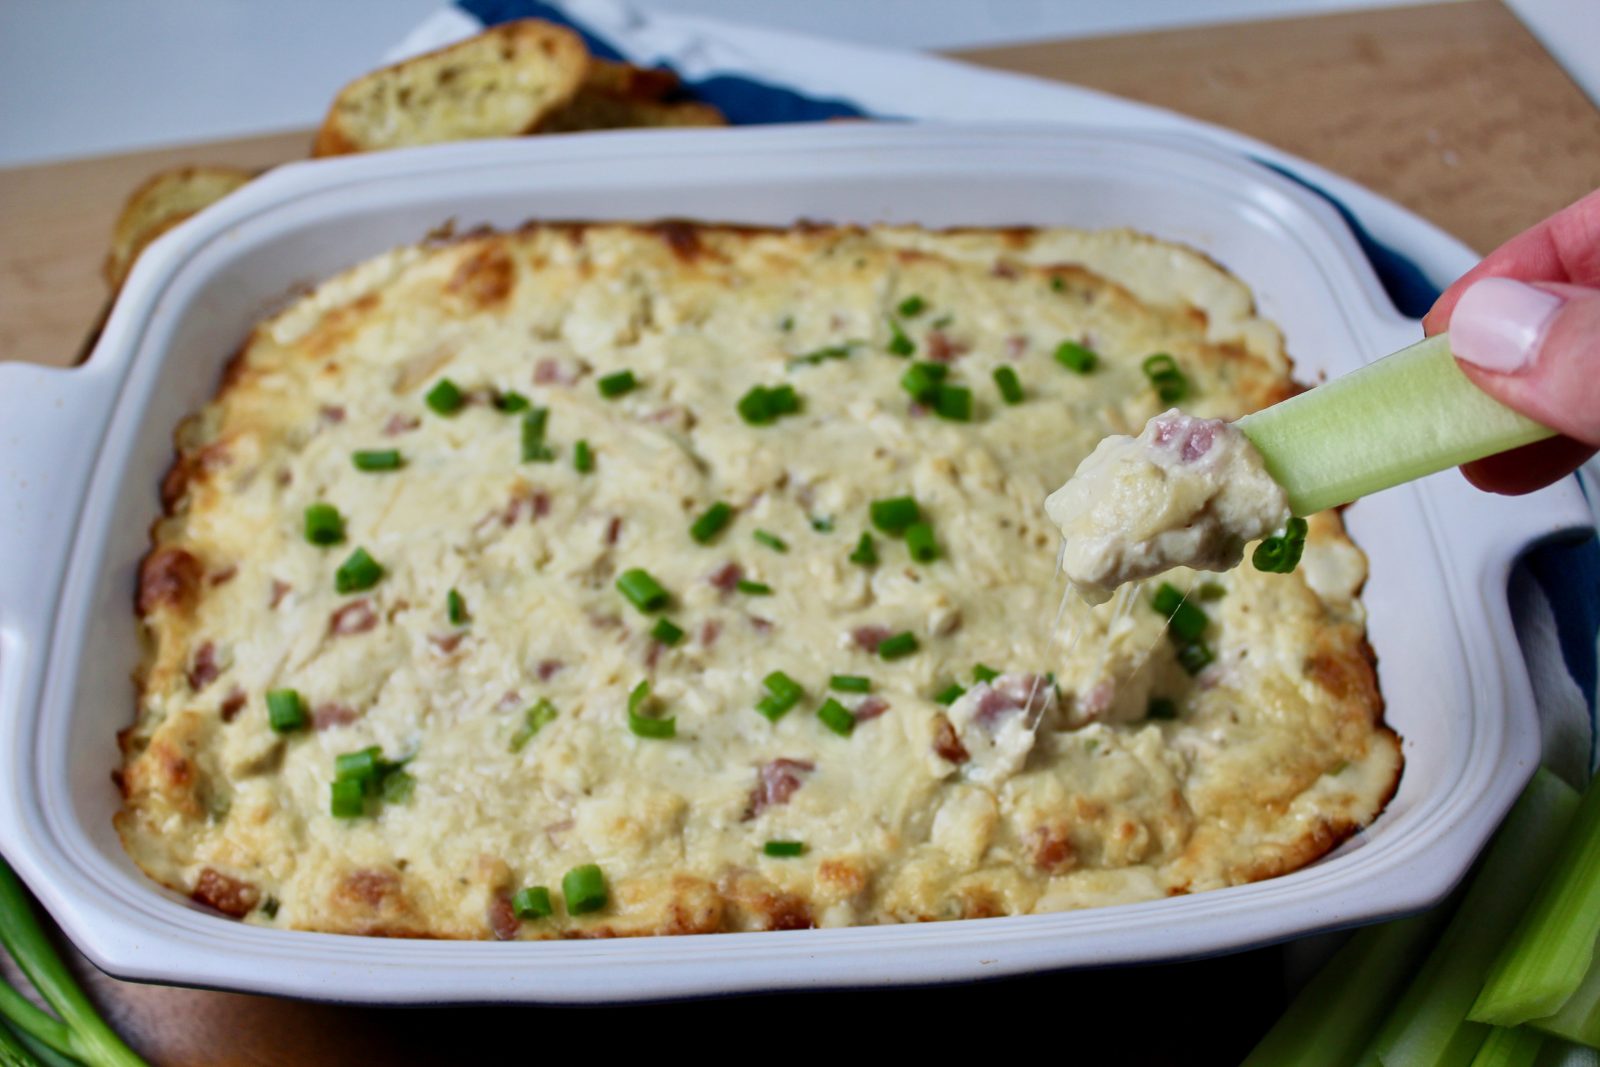 Chicken Cordon Bleu Dip in a rectangular blue casserole dish. Celery stick being scooped into hot dip sprinkled with sliced green onion